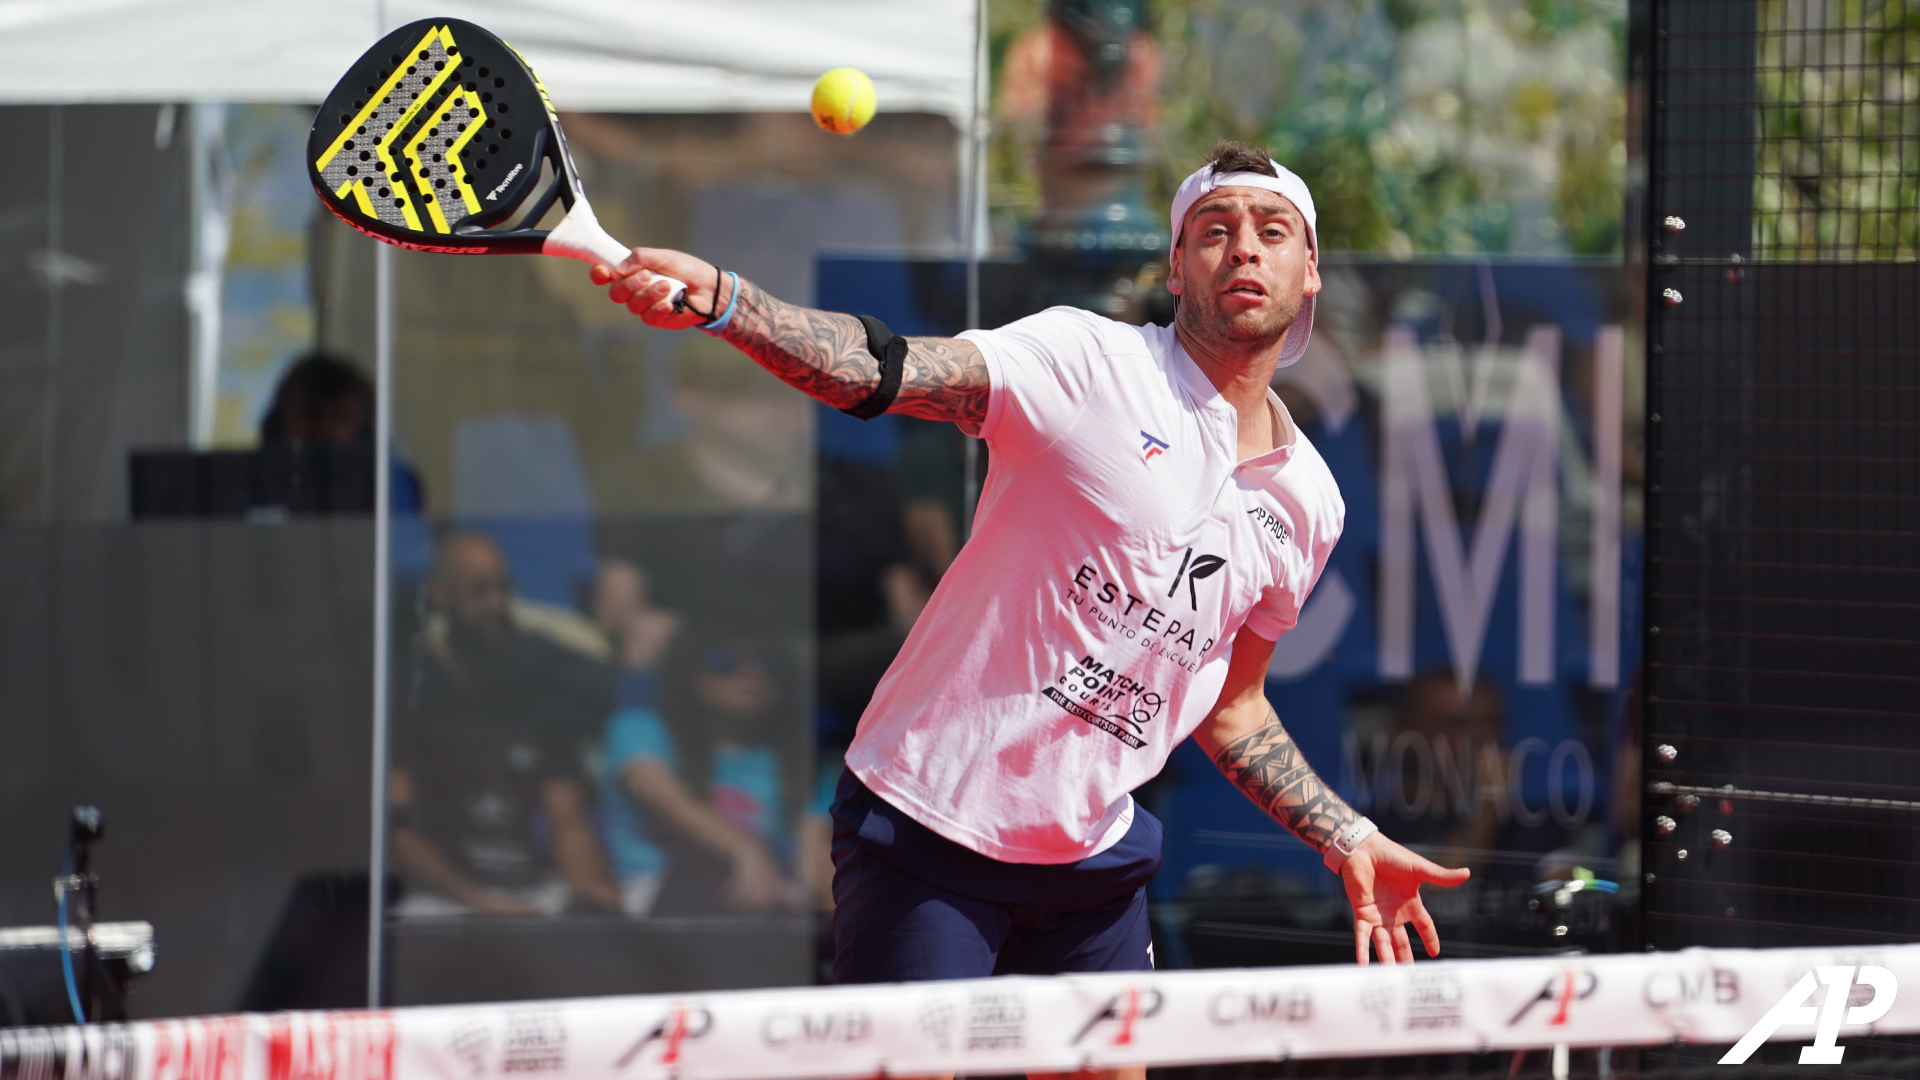 A1 Padel Monaco Master – The big names at the meeting for the final